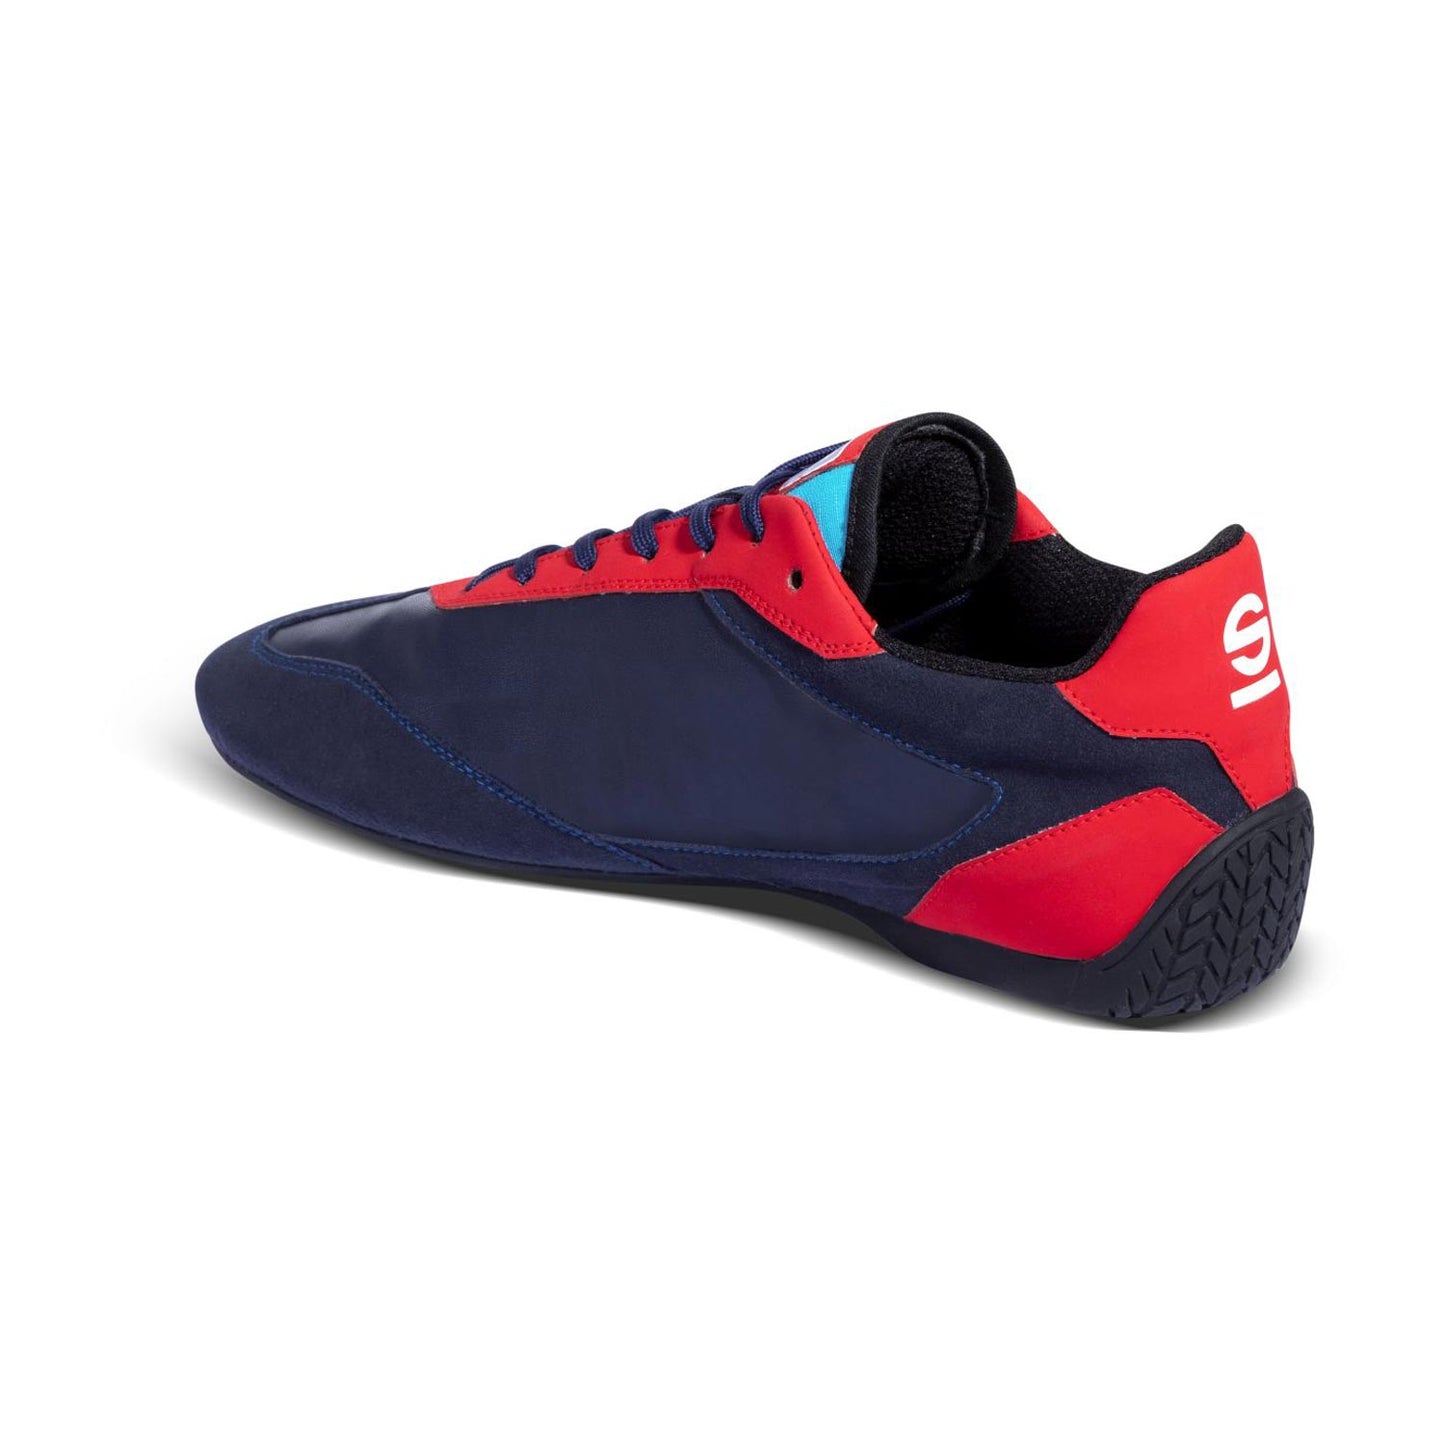 Sparco Martini S-DRIVE Shoes navy/red